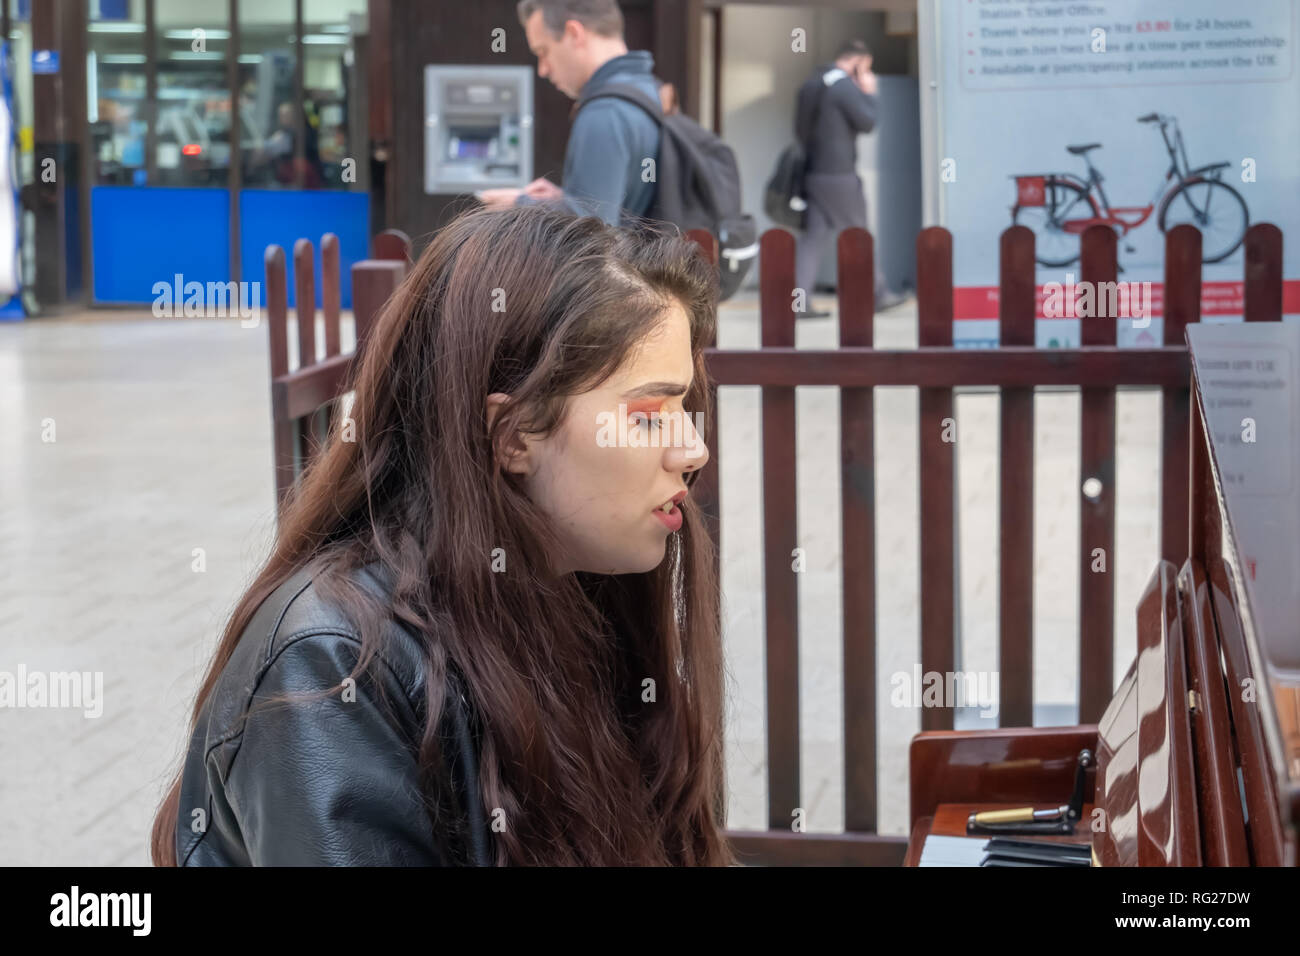 Glasgow, Scotland, UK. 27th January, 2019. Mya Brown a 16 year old musician plays the piano that stands on the concourse of Central Station and sings the song Creep by the rock band Radiohead. Credit: Skully/Alamy Live News Stock Photo